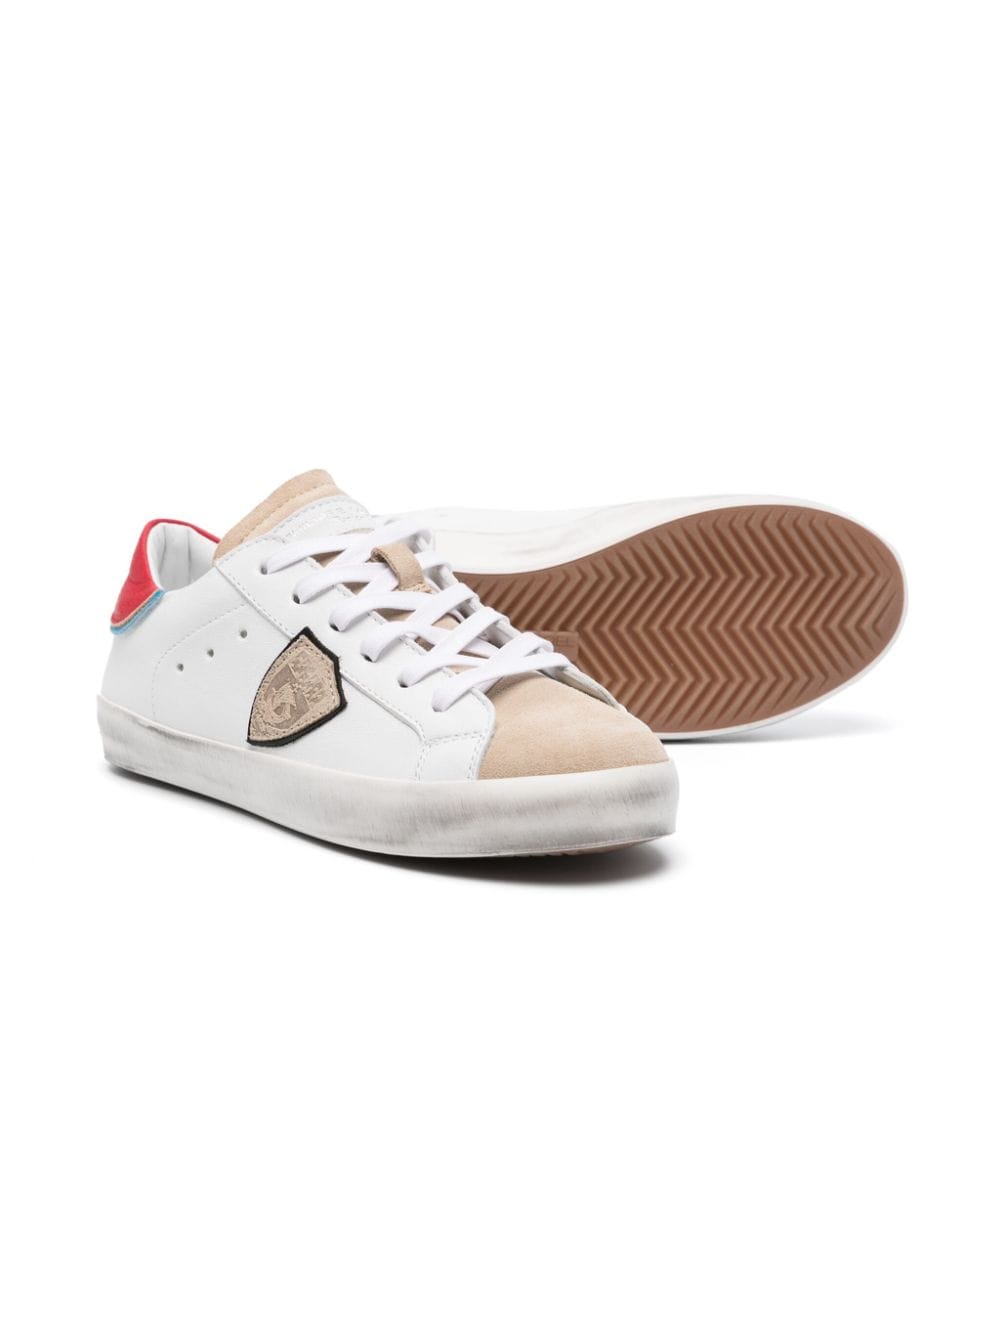 Image 2 of Philippe Model Kids Paris leather sneakers